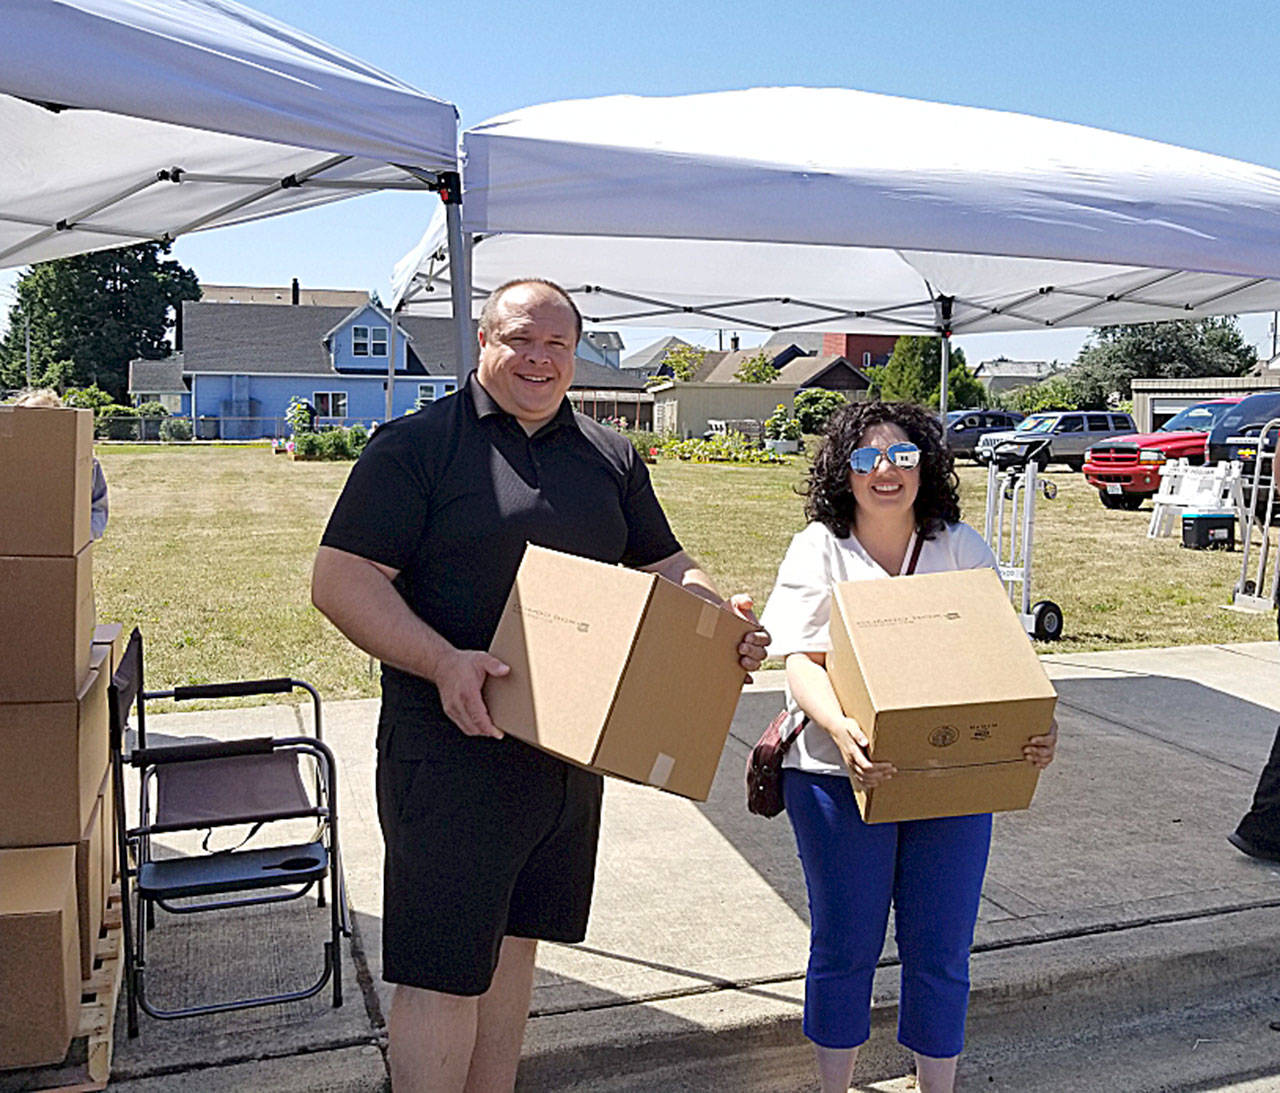 Hoquiam Mayor Ben Winkelman and Saron Lutheran-First Presbyterian Church Rev. Michelle de Beauchamp teamed with other partners to give away 100 boxes of produce and other groceries to Hoquiam residents Thursday. (Courtesy photo)